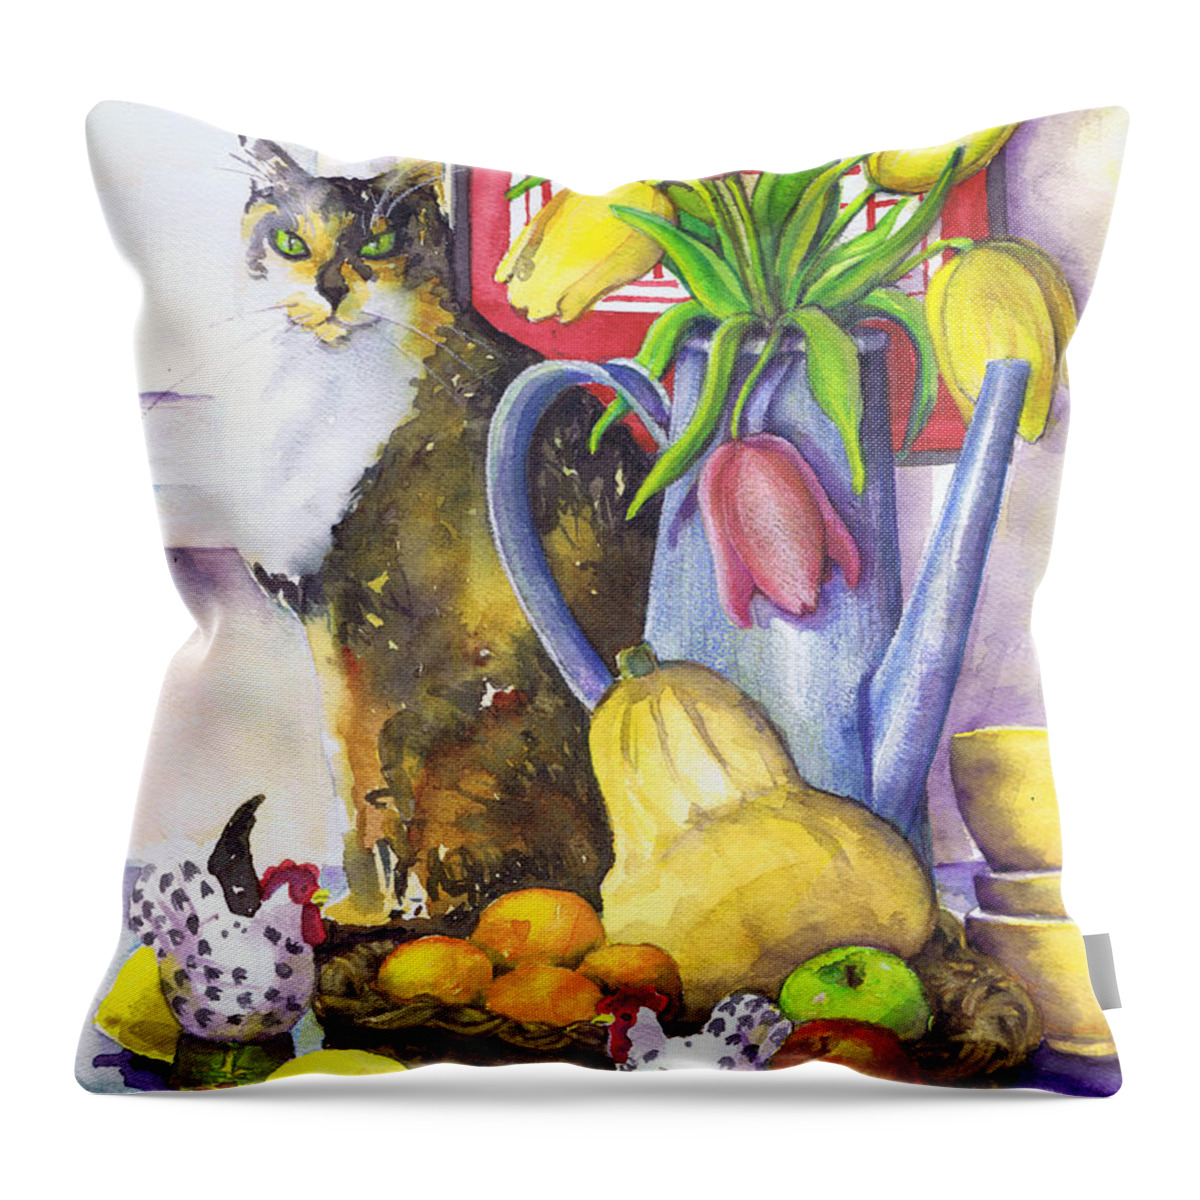 Cat Throw Pillow featuring the painting Still Life With Cat by Susan Herbst